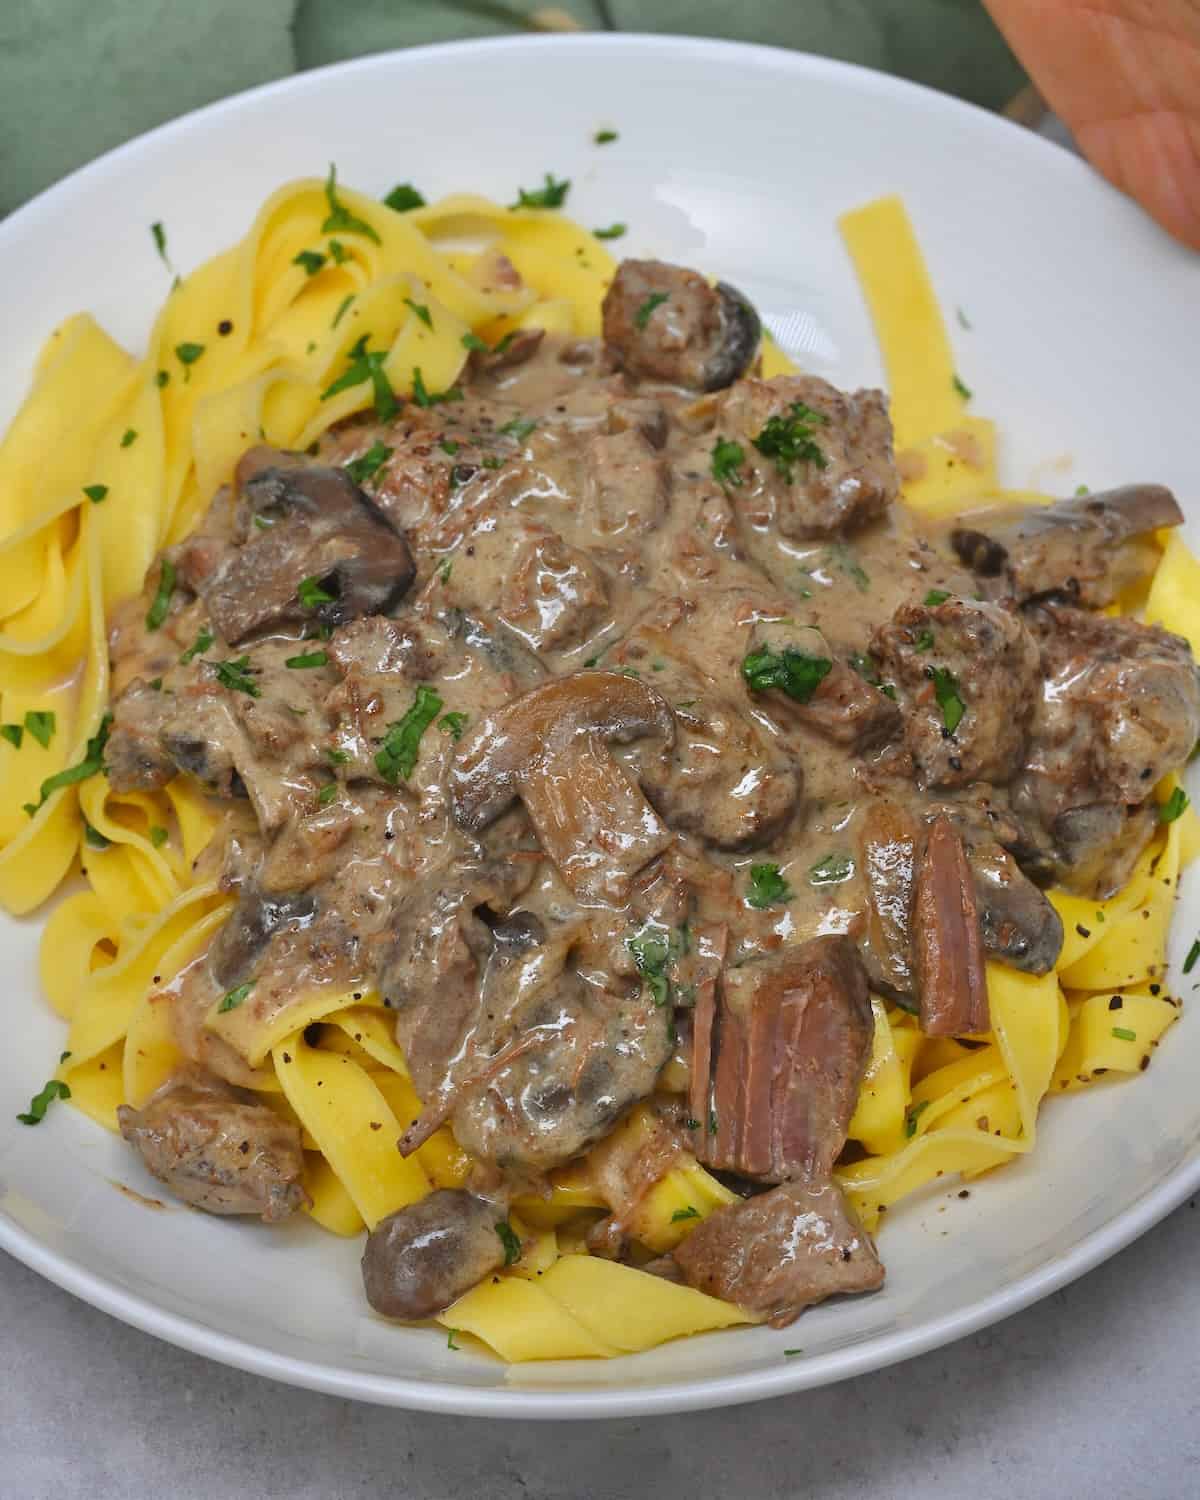 A serving of beef stroganoff with pasta